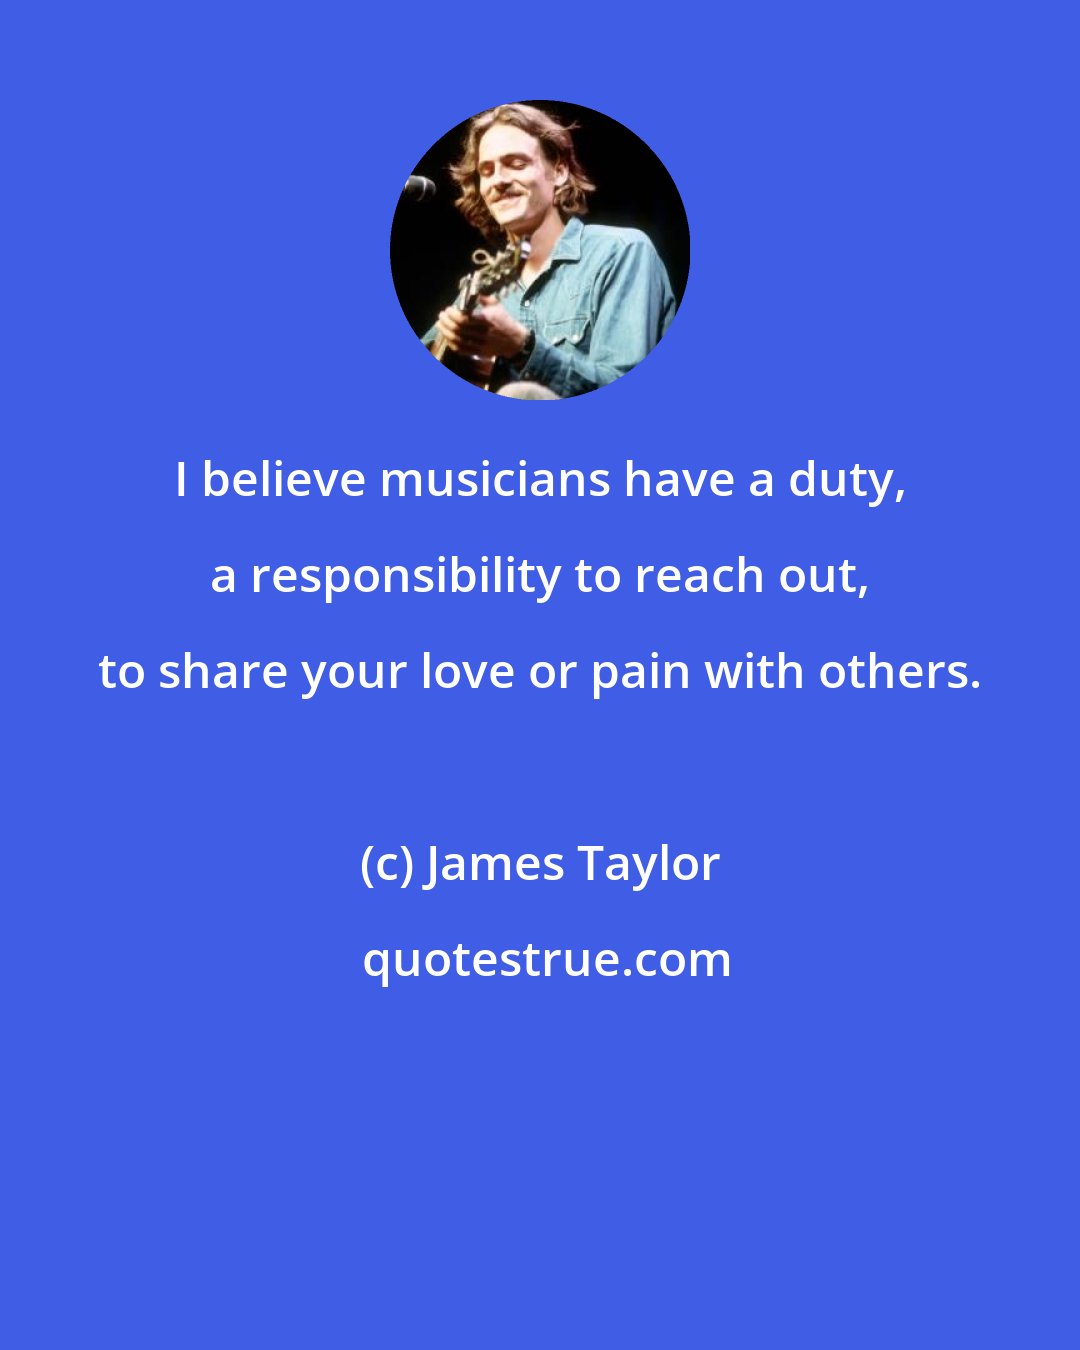 James Taylor: I believe musicians have a duty, a responsibility to reach out, to share your love or pain with others.